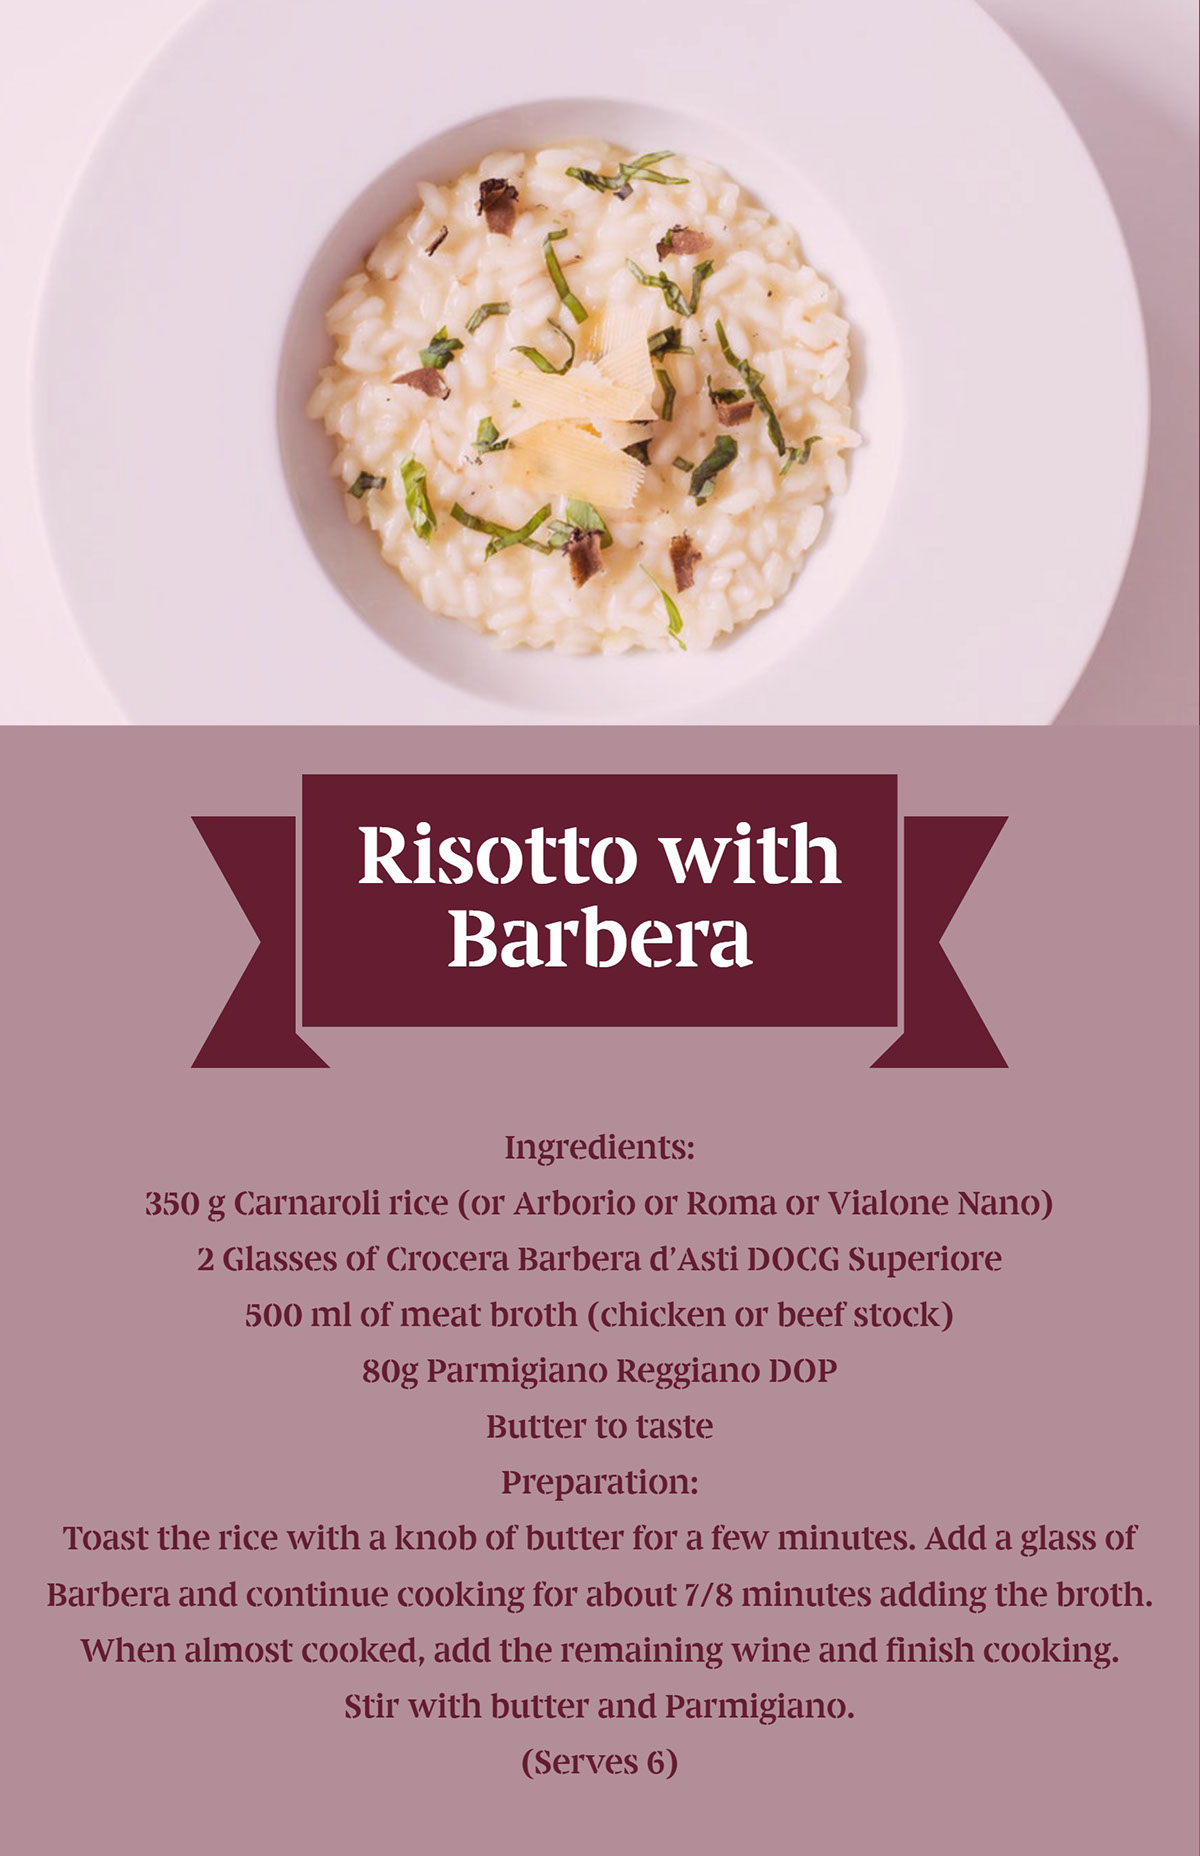 Risotto with Barbera Risotto with Barbera<P>Ingredients:<BR>350 g Carnaroli rice (or Arborio or Roma or Vialone Nano)<BR>2 Glasses of Crocera Barbera d’Asti DOCG Superiore
500 ml of meat broth (chicken or beef stock)
80g Parmigiano Reggiano DOP
Butter to taste

Preparation:
Toast the rice with a knob of butter for a few minutes. Add a glass of Barbera and continue cooking for about 7/8 minutes adding the broth. When almost cooked, add the remaining wine and finish cooking. Stir with butter and Parmigiano.
(Serves 6)
